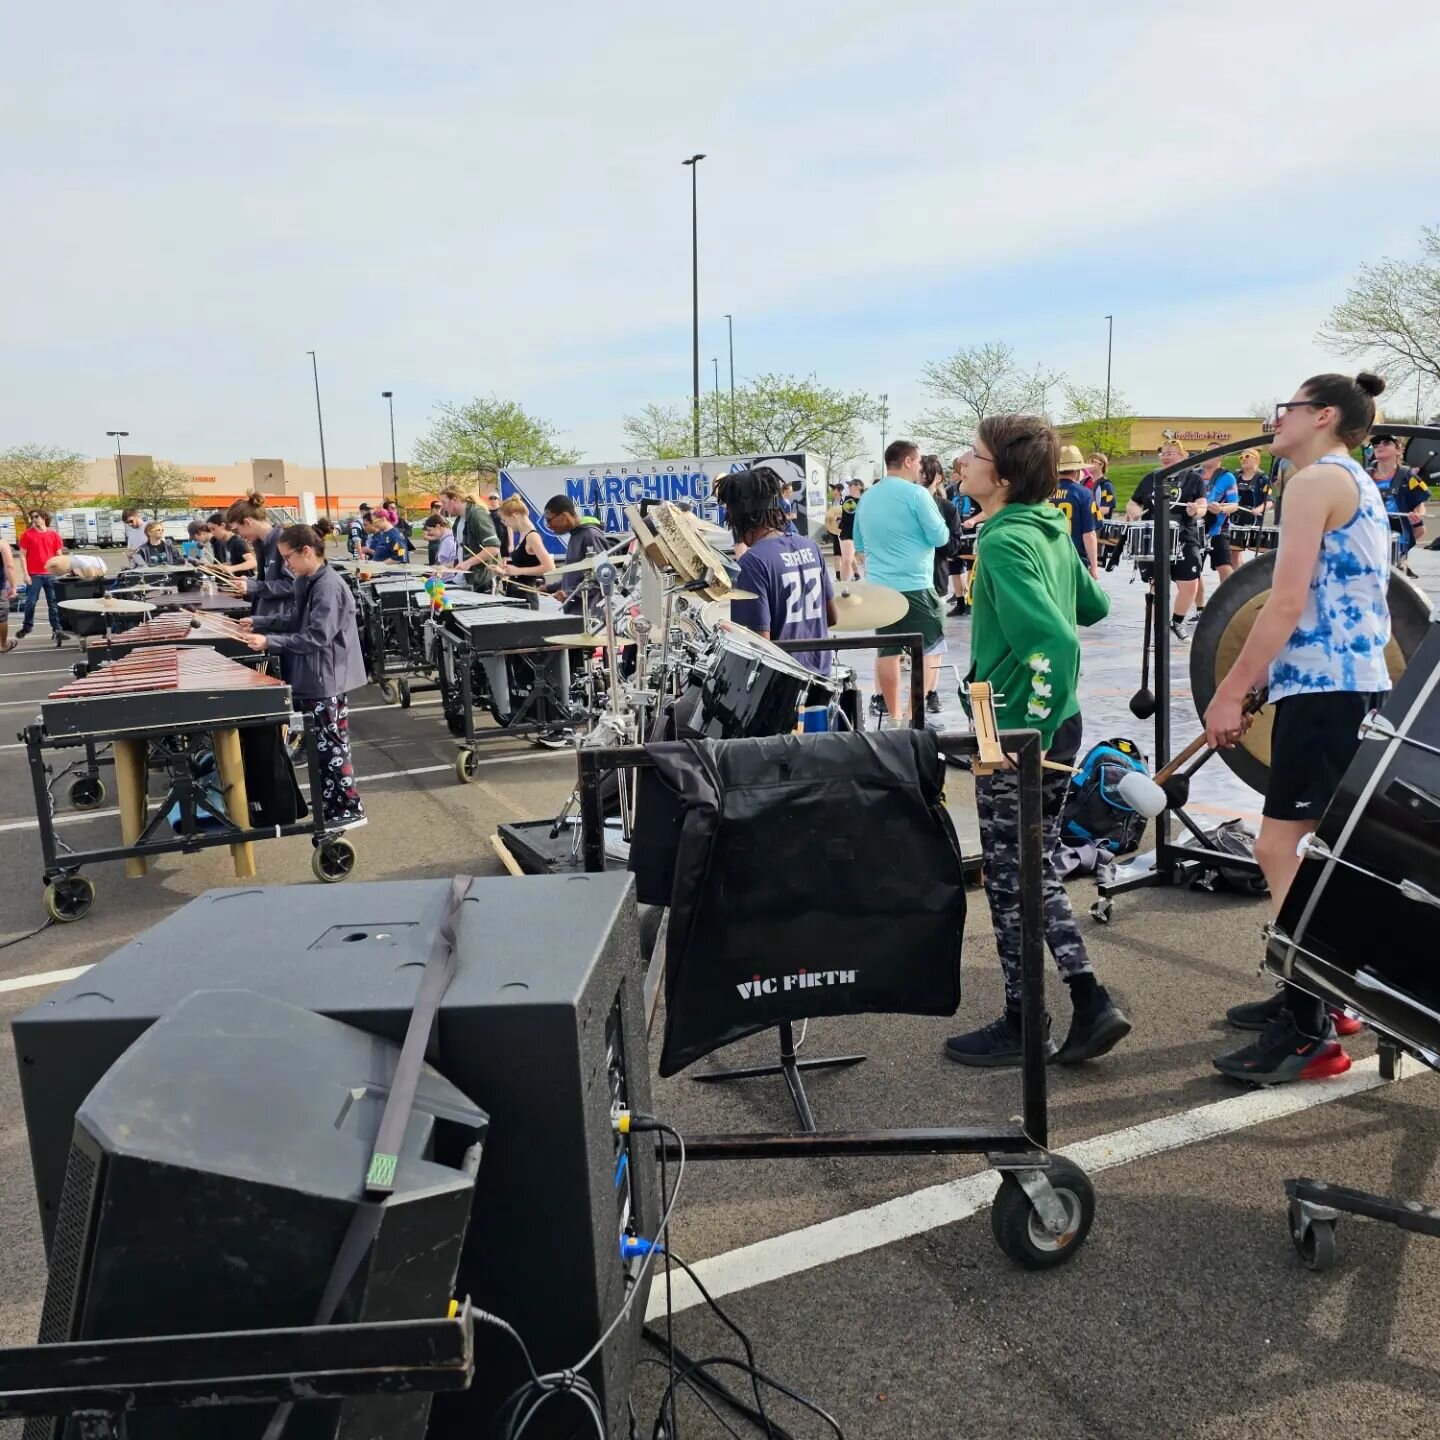 Getting some outdoor reps in this great weather before prelims!
.
.
.
#LEP23 #PerformMAPA #WGI23 @vicfirth @zildjiancompany